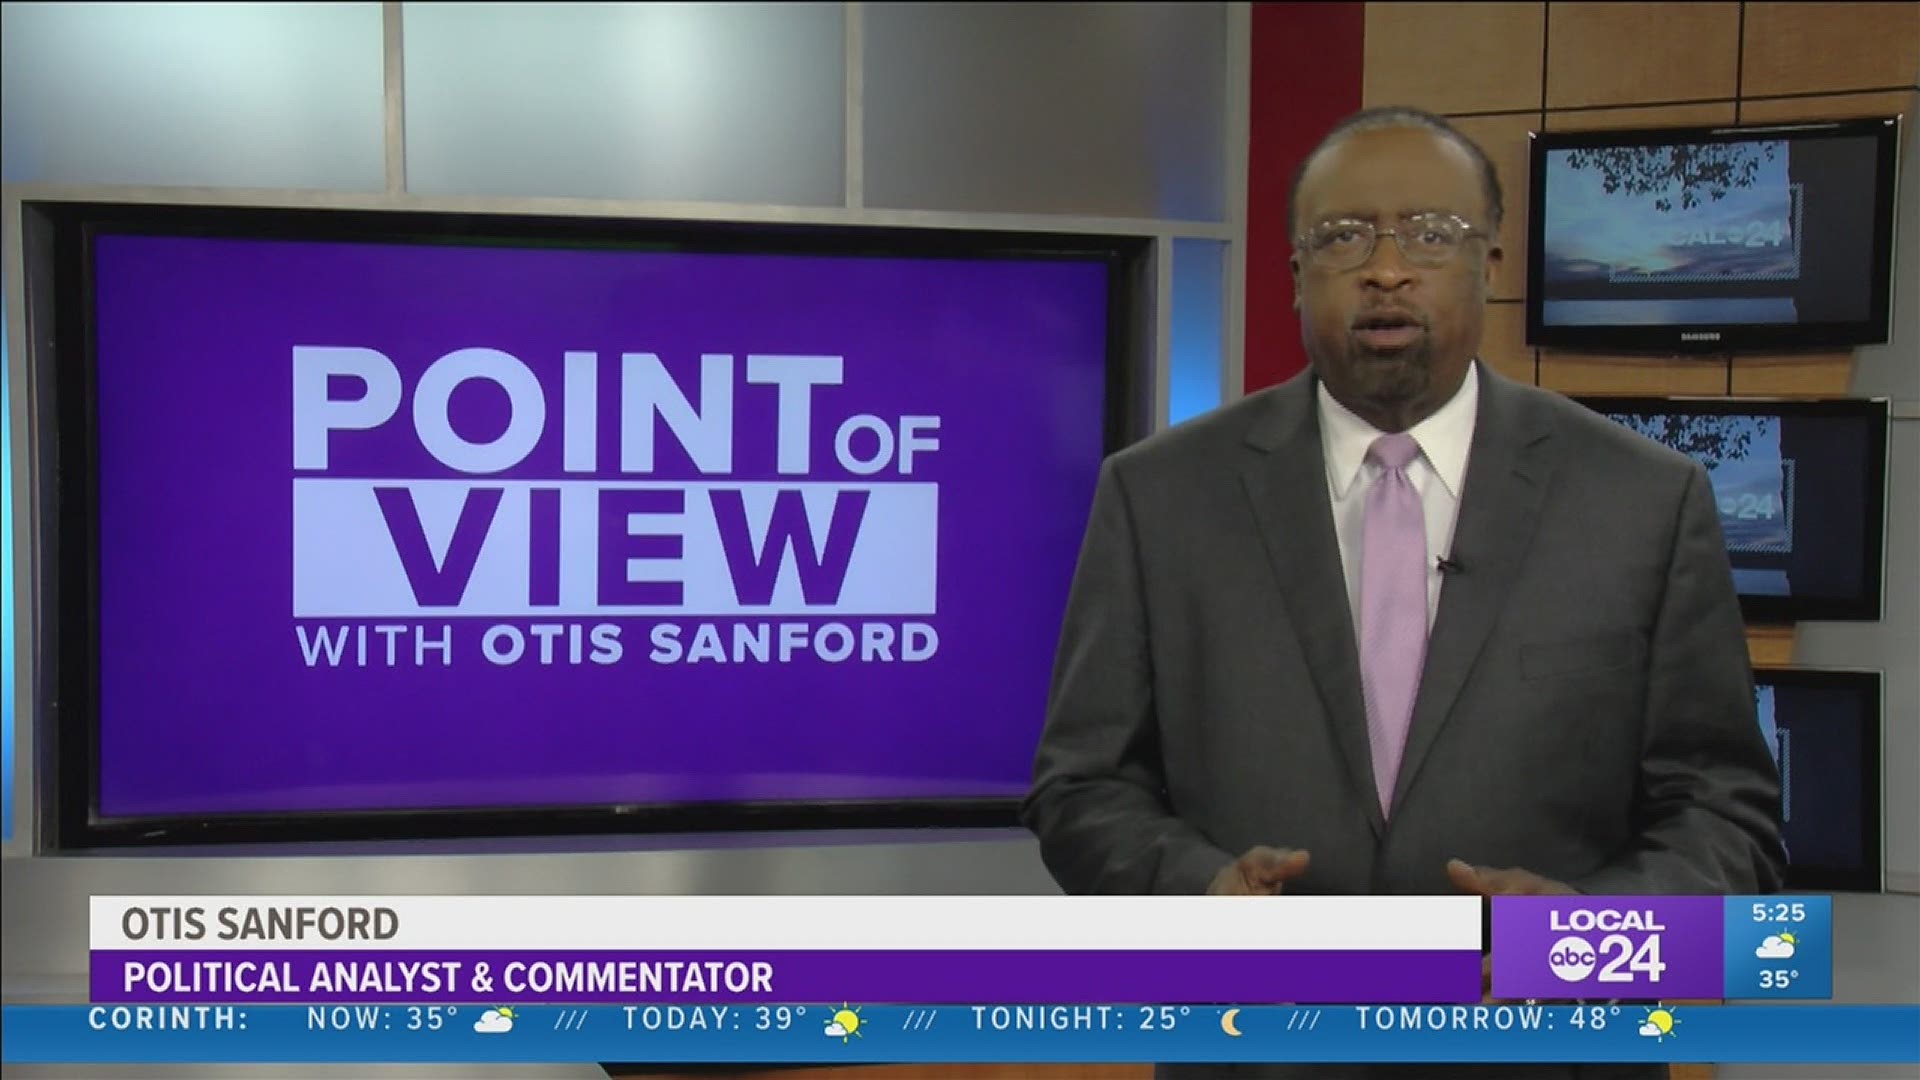 Local 24 News political analyst and commentator Otis Sanford shares his point of view on COVID-19 and jury trials in Shelby County.